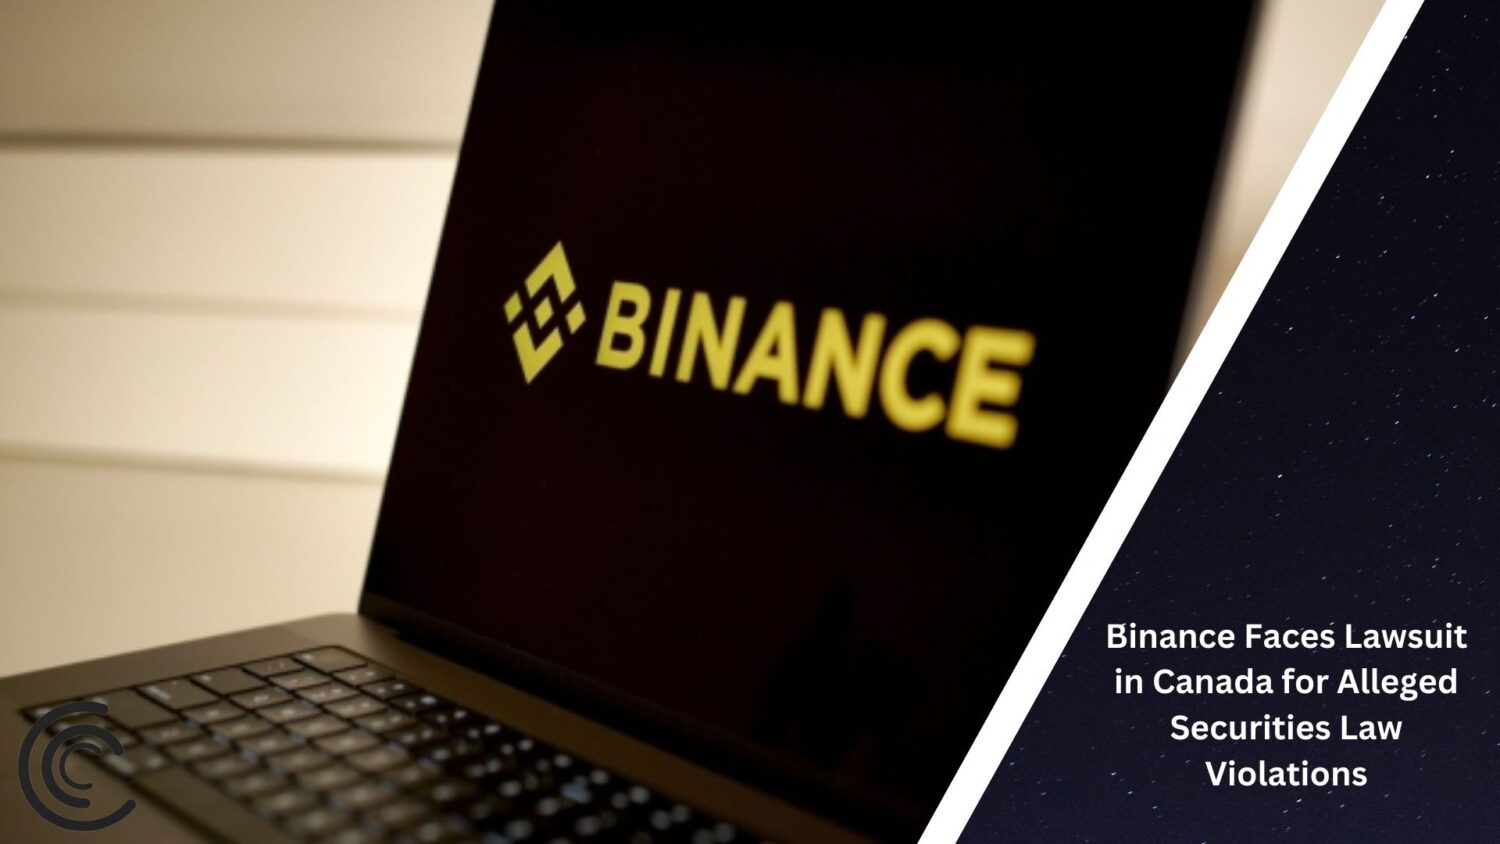 Binance Faces Lawsuit In Canada For Alleged Securities Law Violations